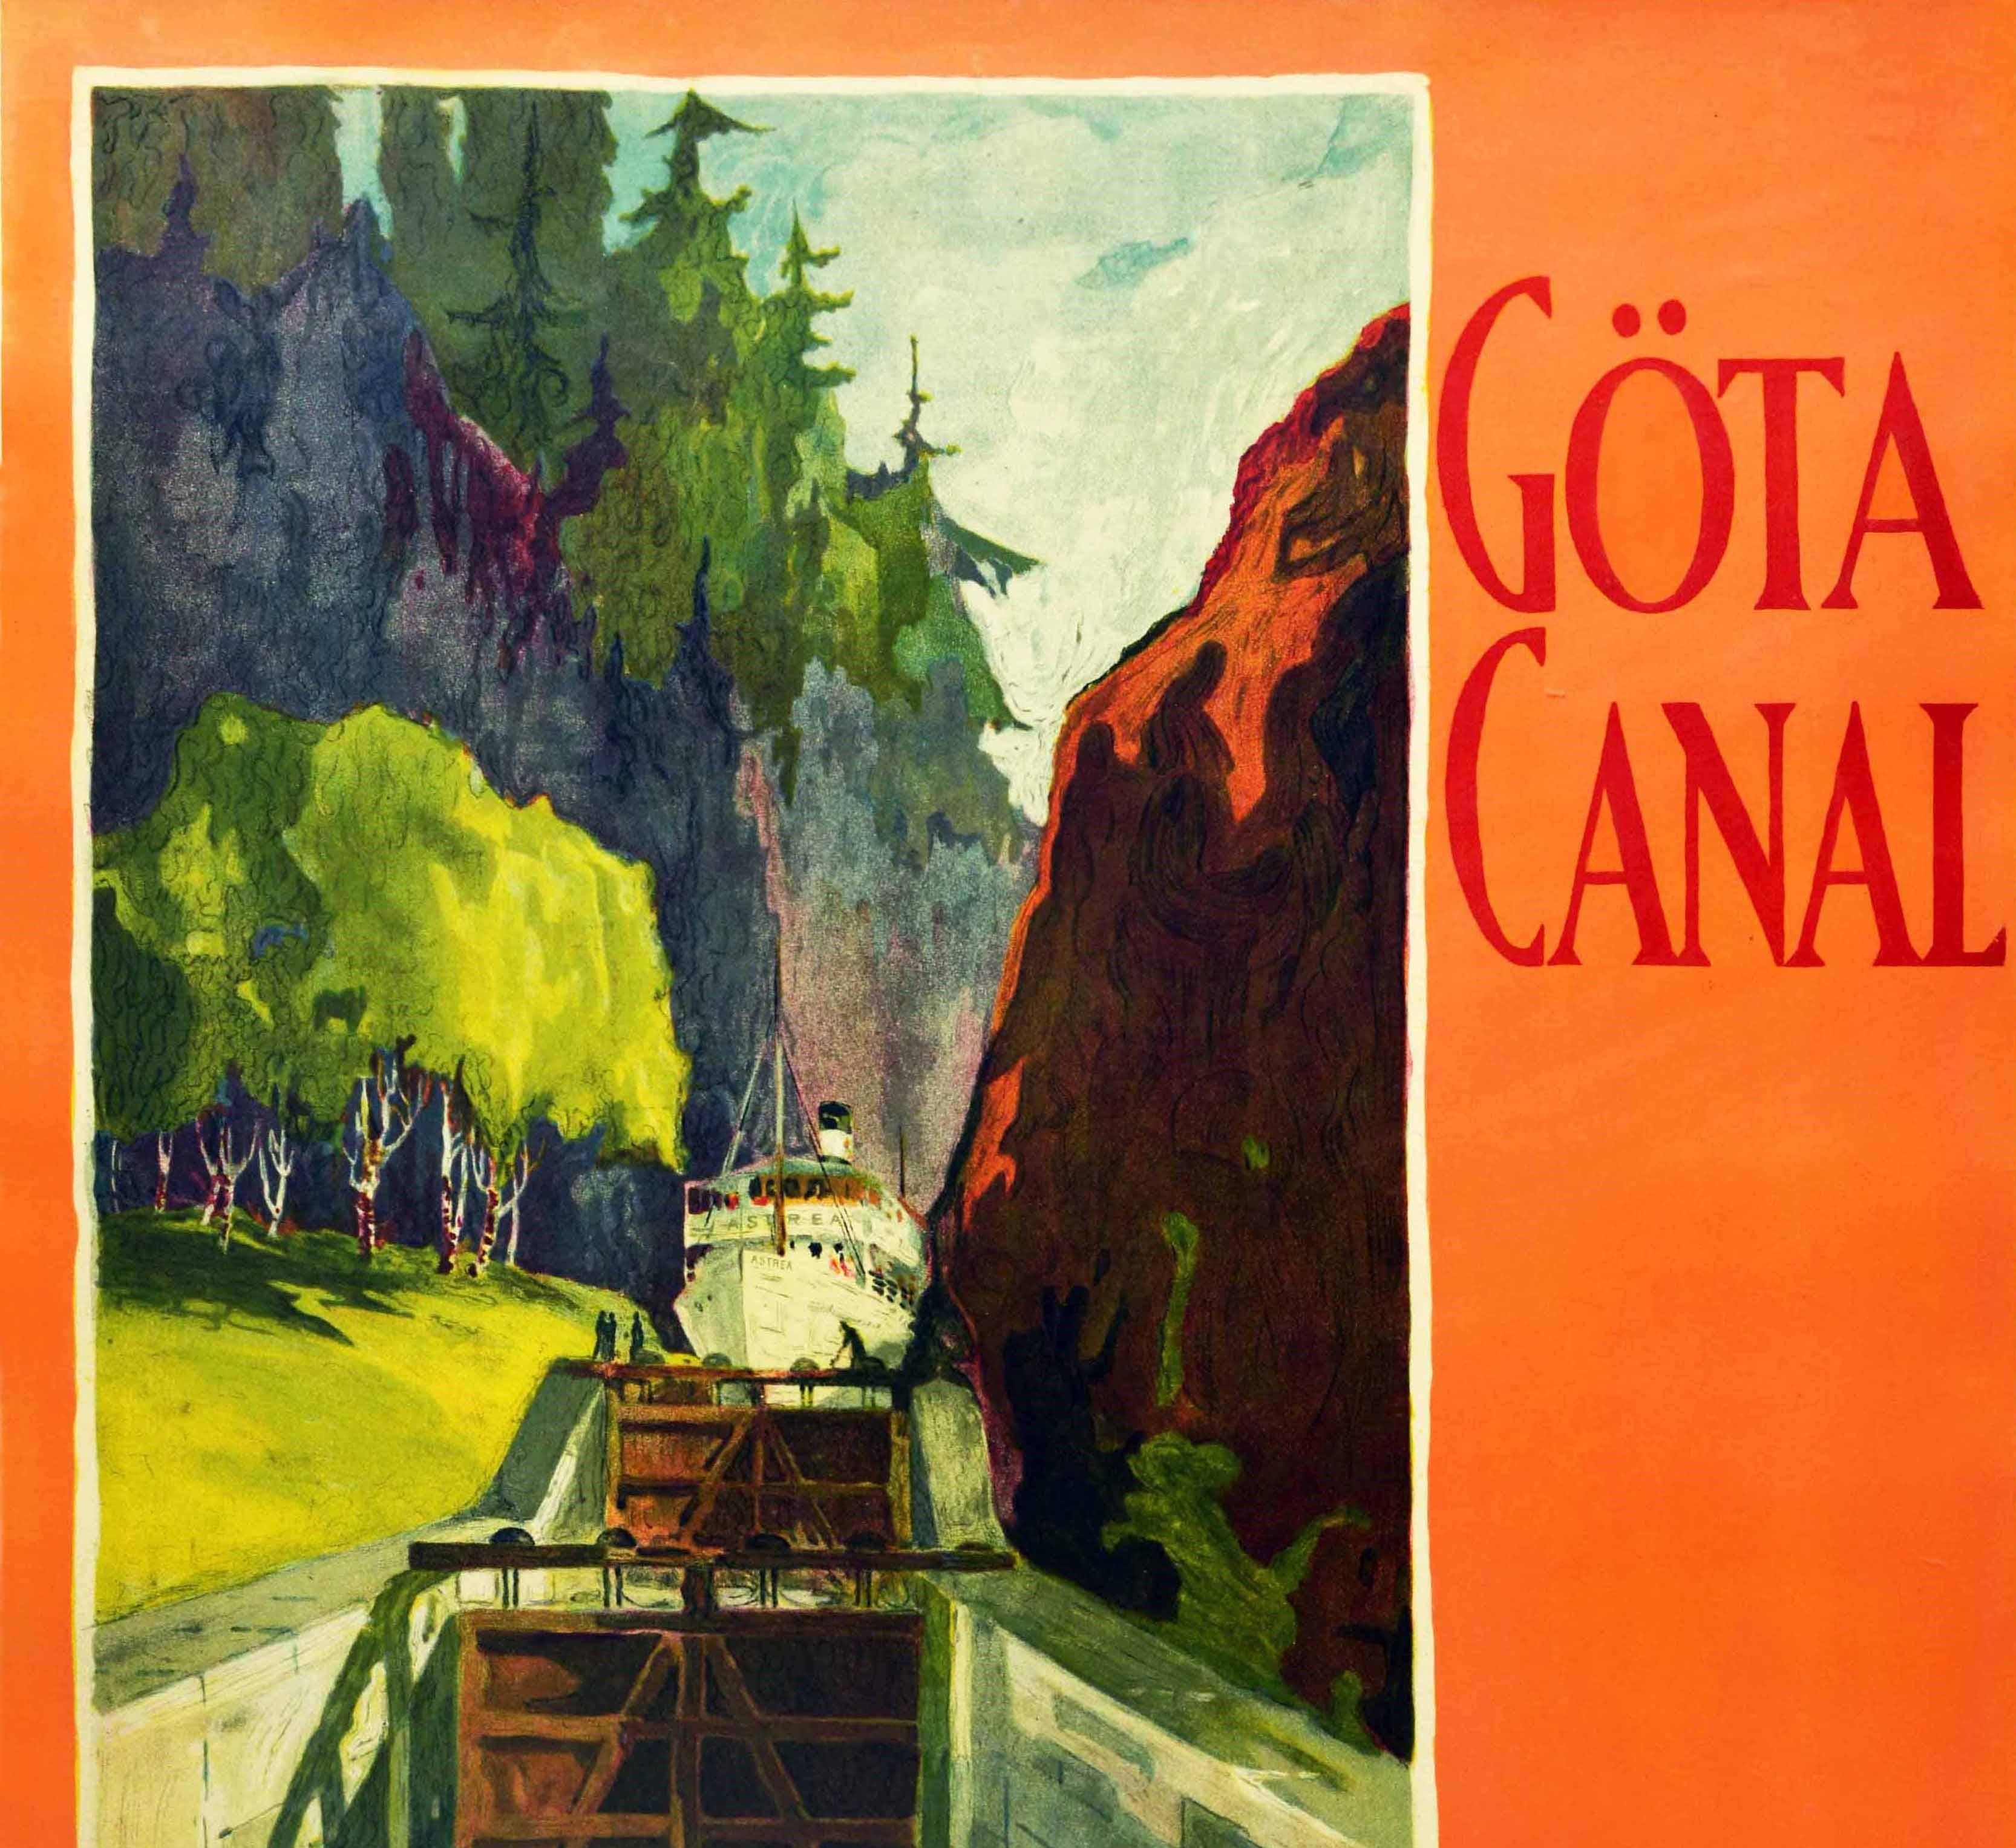 Original vintage travel poster advertising A Cruise through Fairyland featuring artwork by the Swedish artist Hjalmar Thoresson (1893-1943) depicting the pleasure cruise Astrea sailing through the Gota Canal surrounded by lush green trees and a